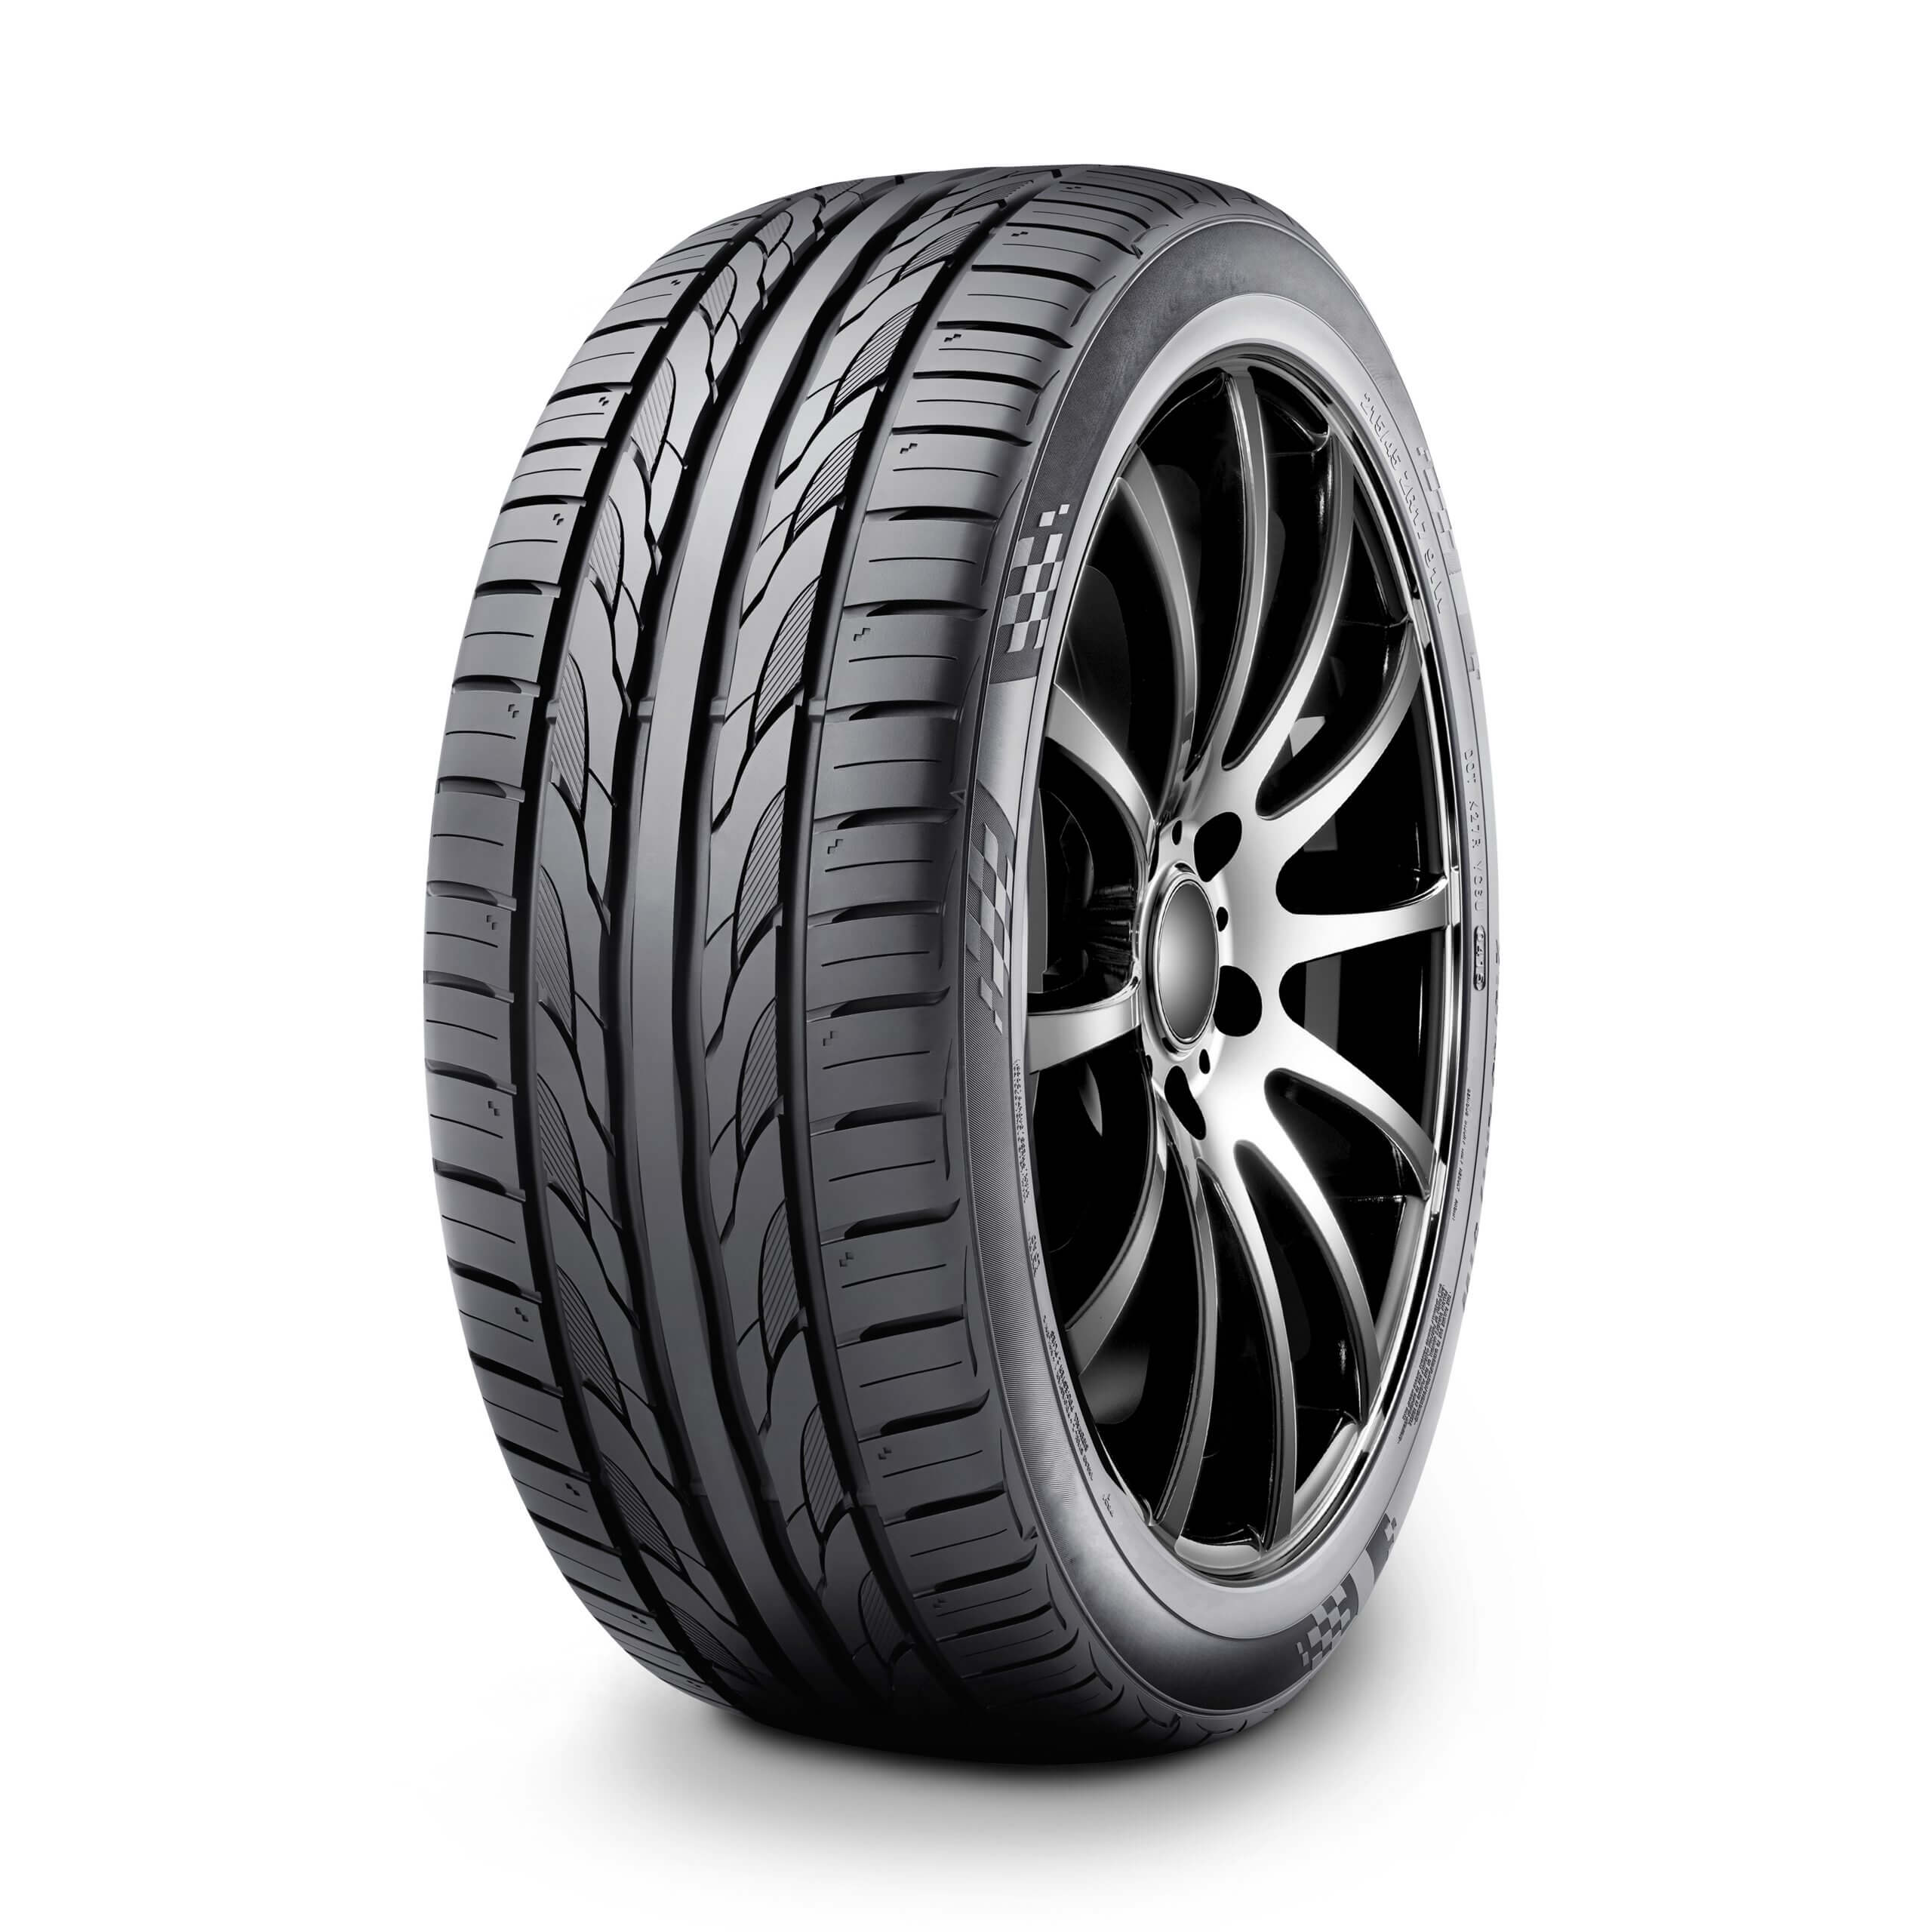 Car Tire Isolated on White Background. Car Wheel. Car Tire with Rim. Semi-Trailer Truck Tire. Tractor Tire. Black Rubber Truck Tire. Clipping Path